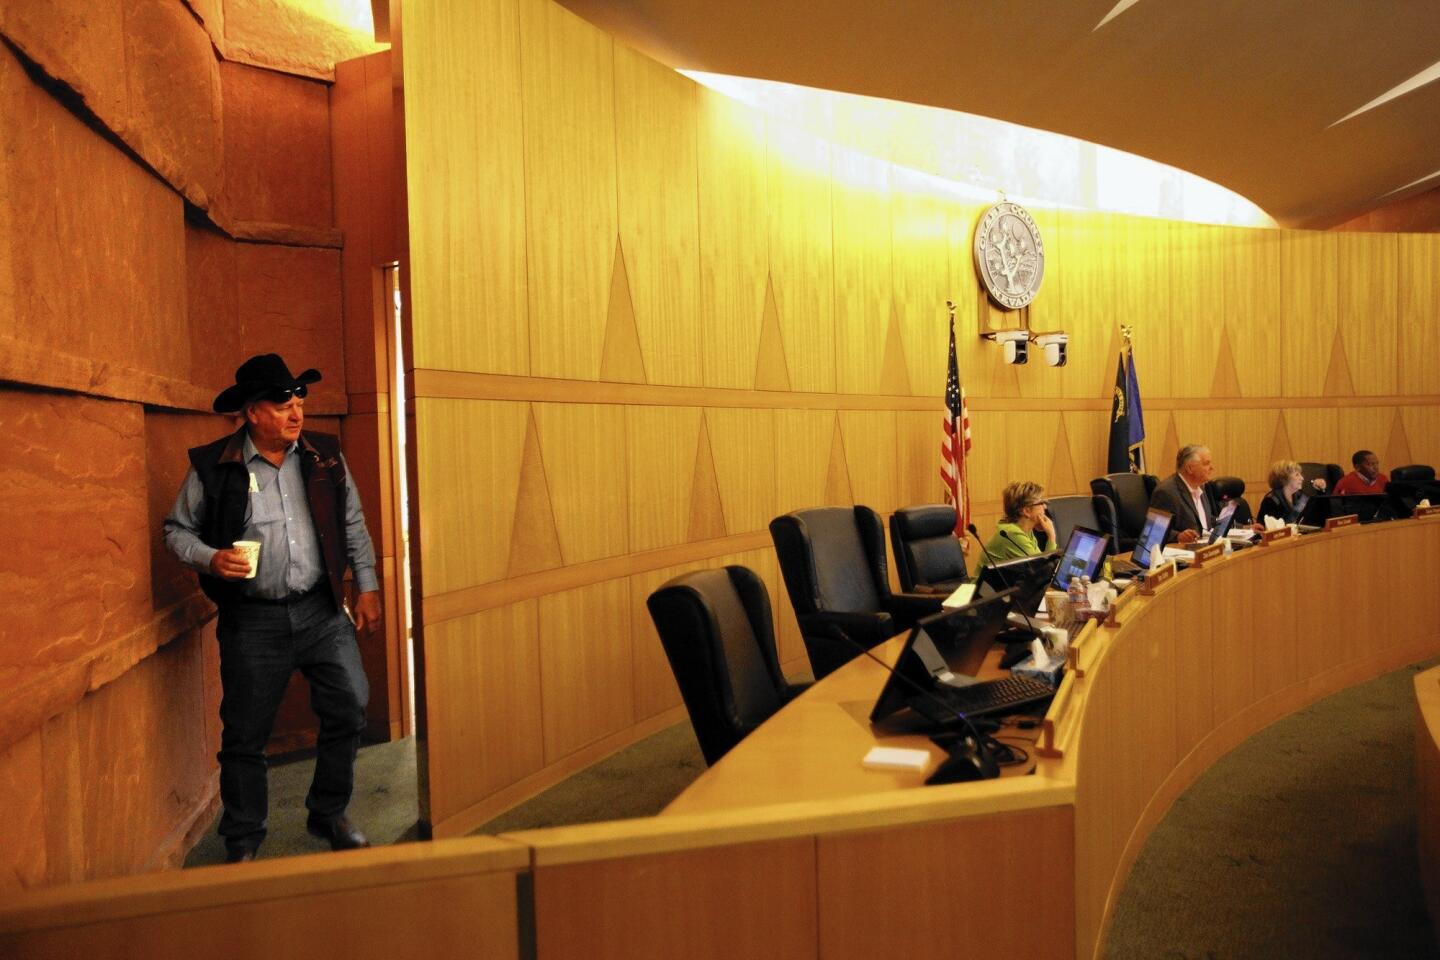 Clark County Commissioner Tom Collins arrives for a zoming meeting in his signature worn jeans and black Stetson.